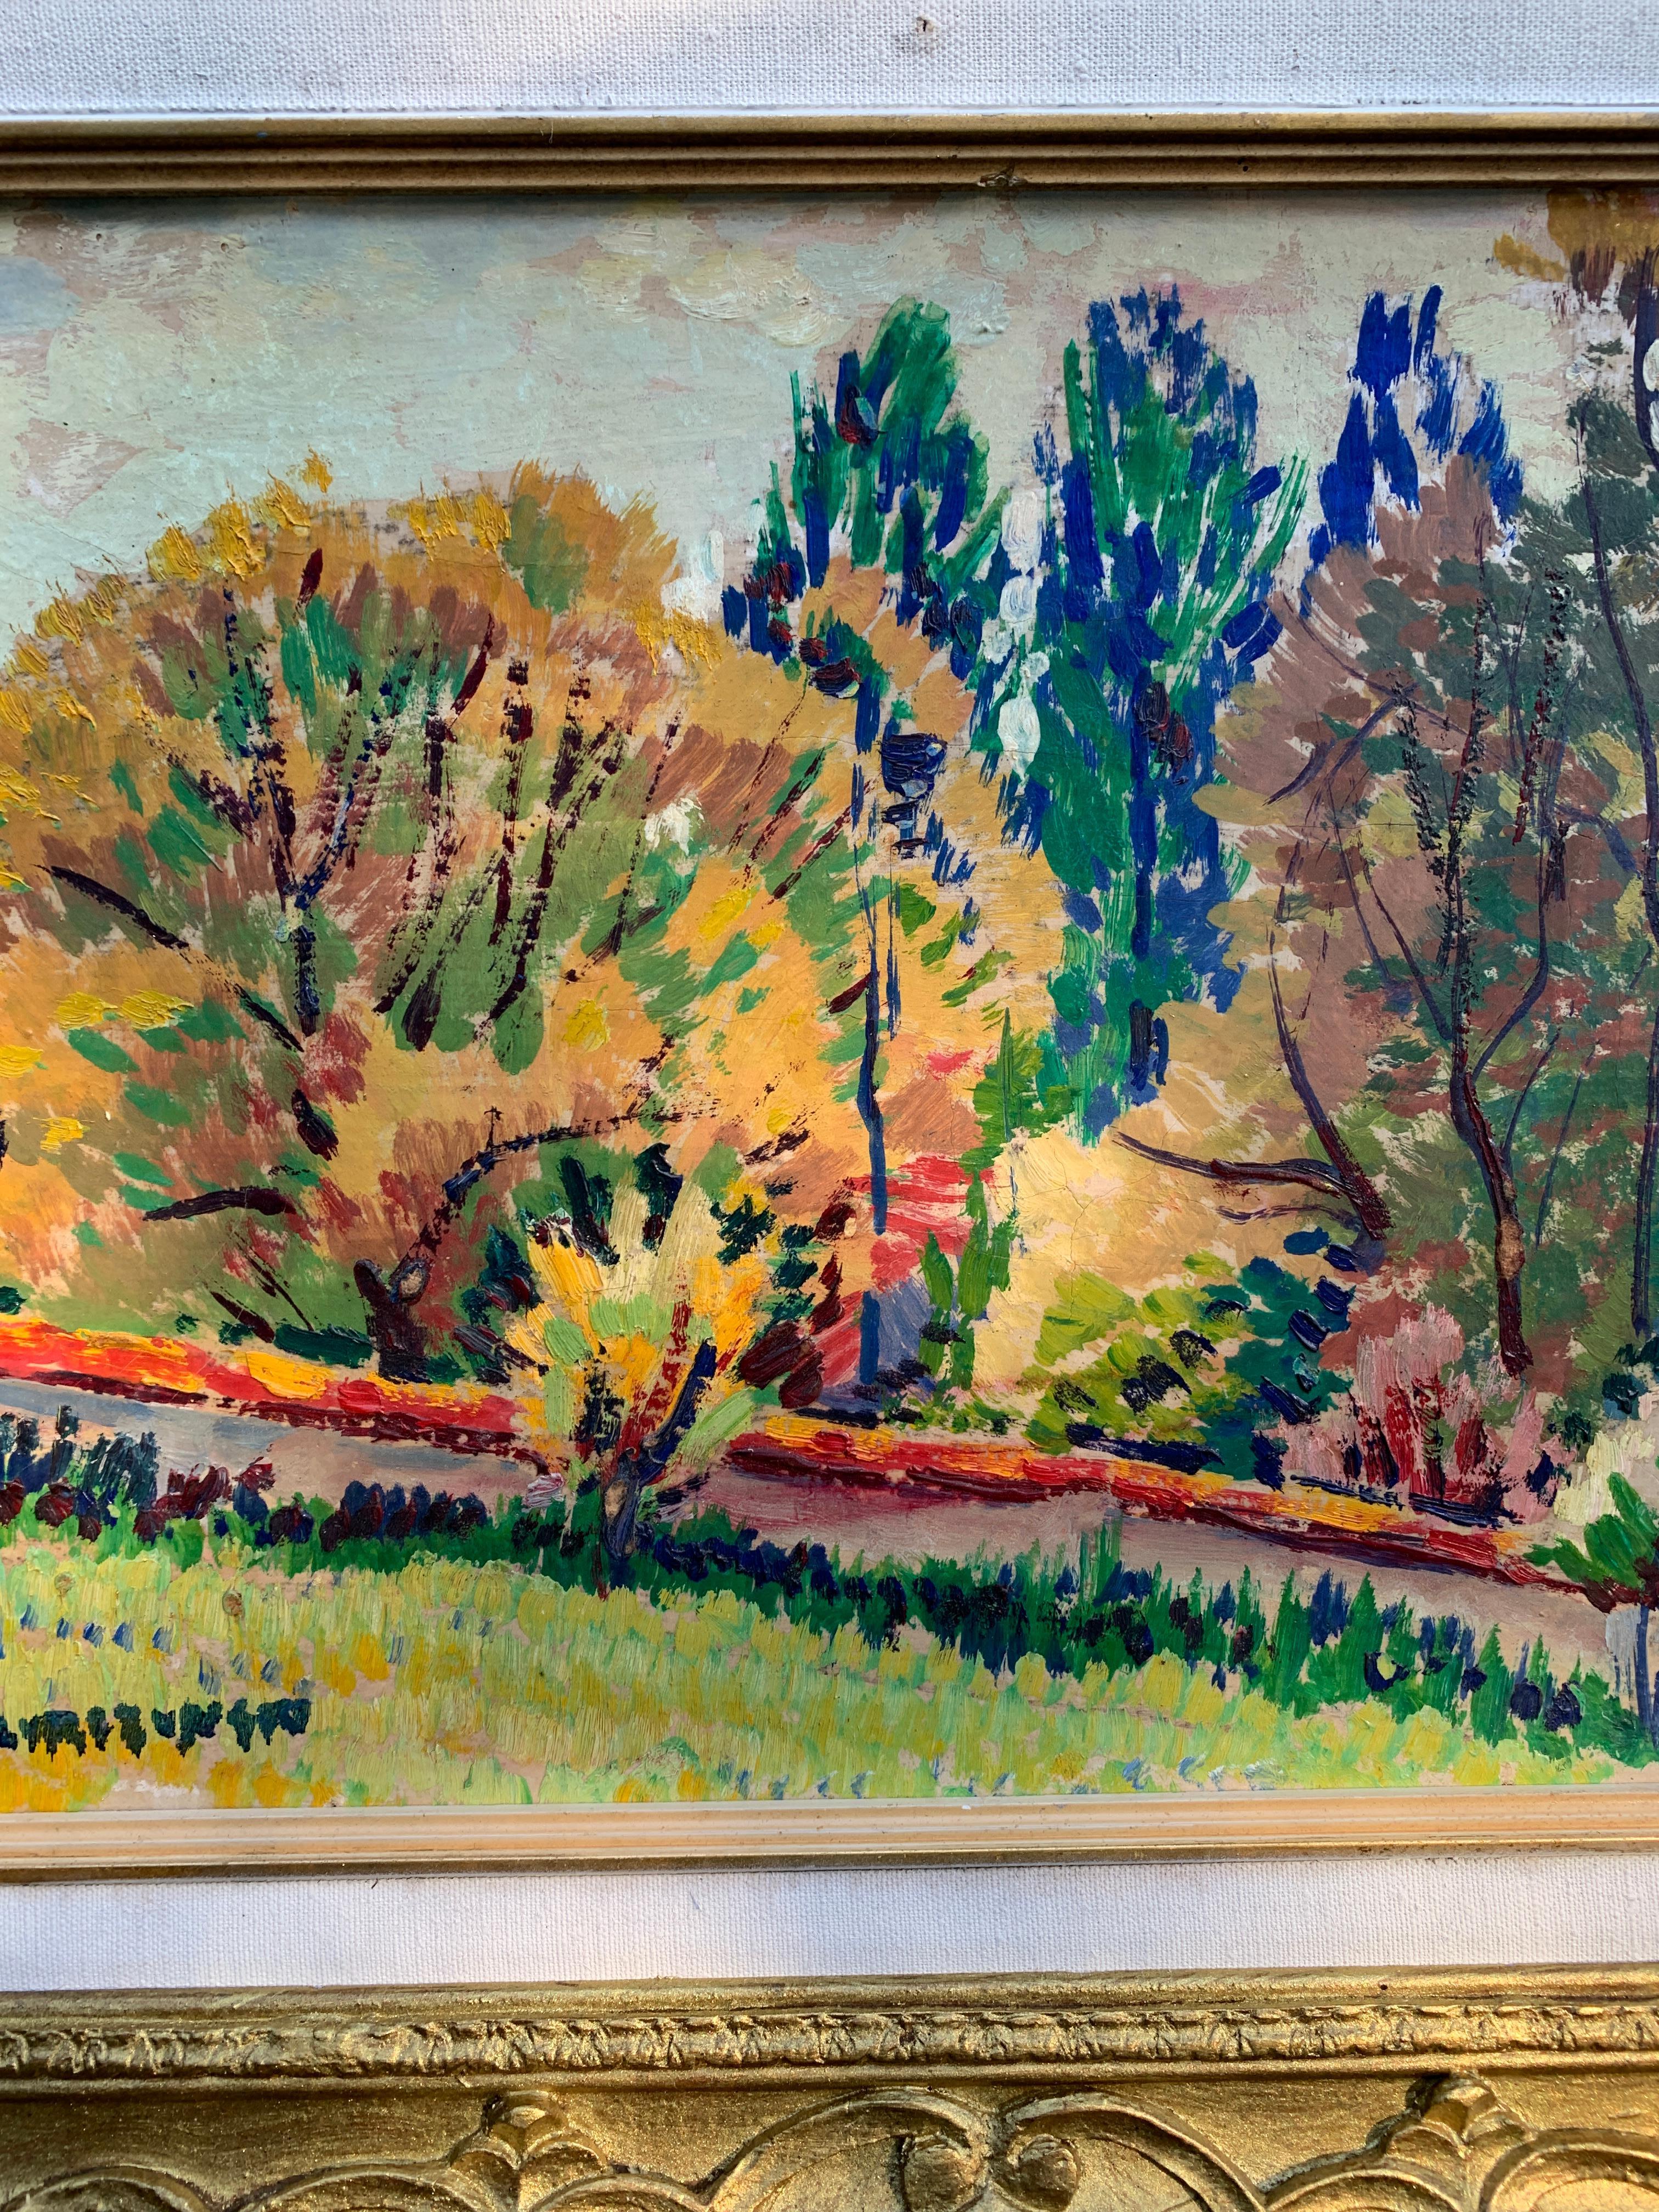 Colorful and well-painted mid-century French landscape. With influences from the Fauve school of painters this piece is very decorative and would brighten up any room.

painted circa 1950

It is painted on an artist's board and is framed in a